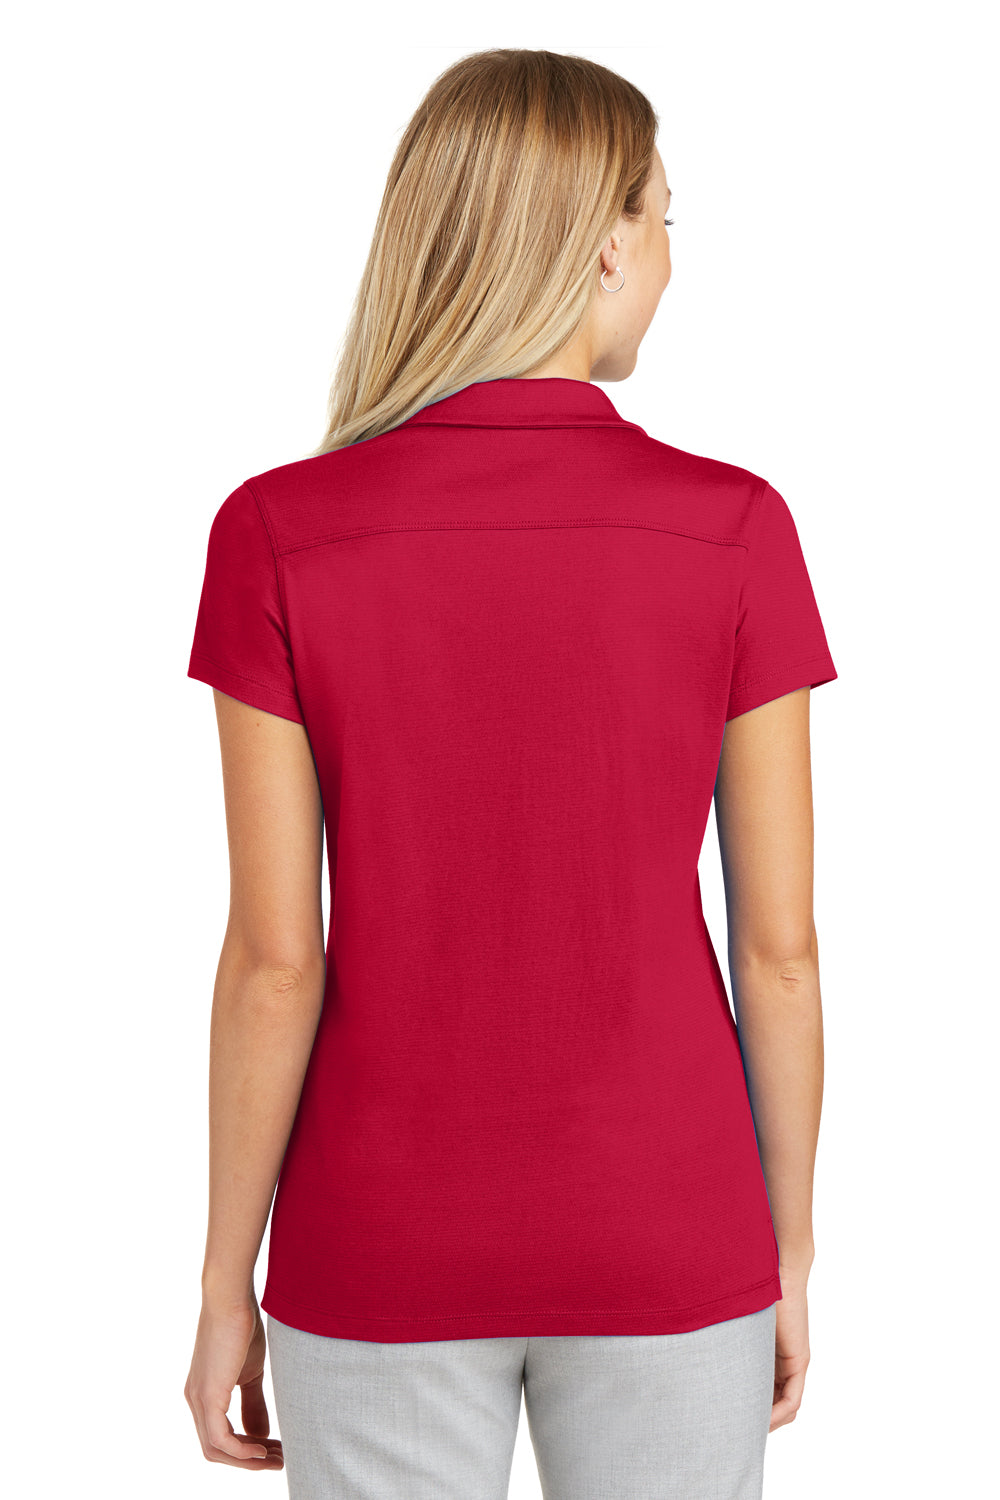 Port Authority L573 Womens Rapid Dry Moisture Wicking Short Sleeve Polo Shirt Red Back